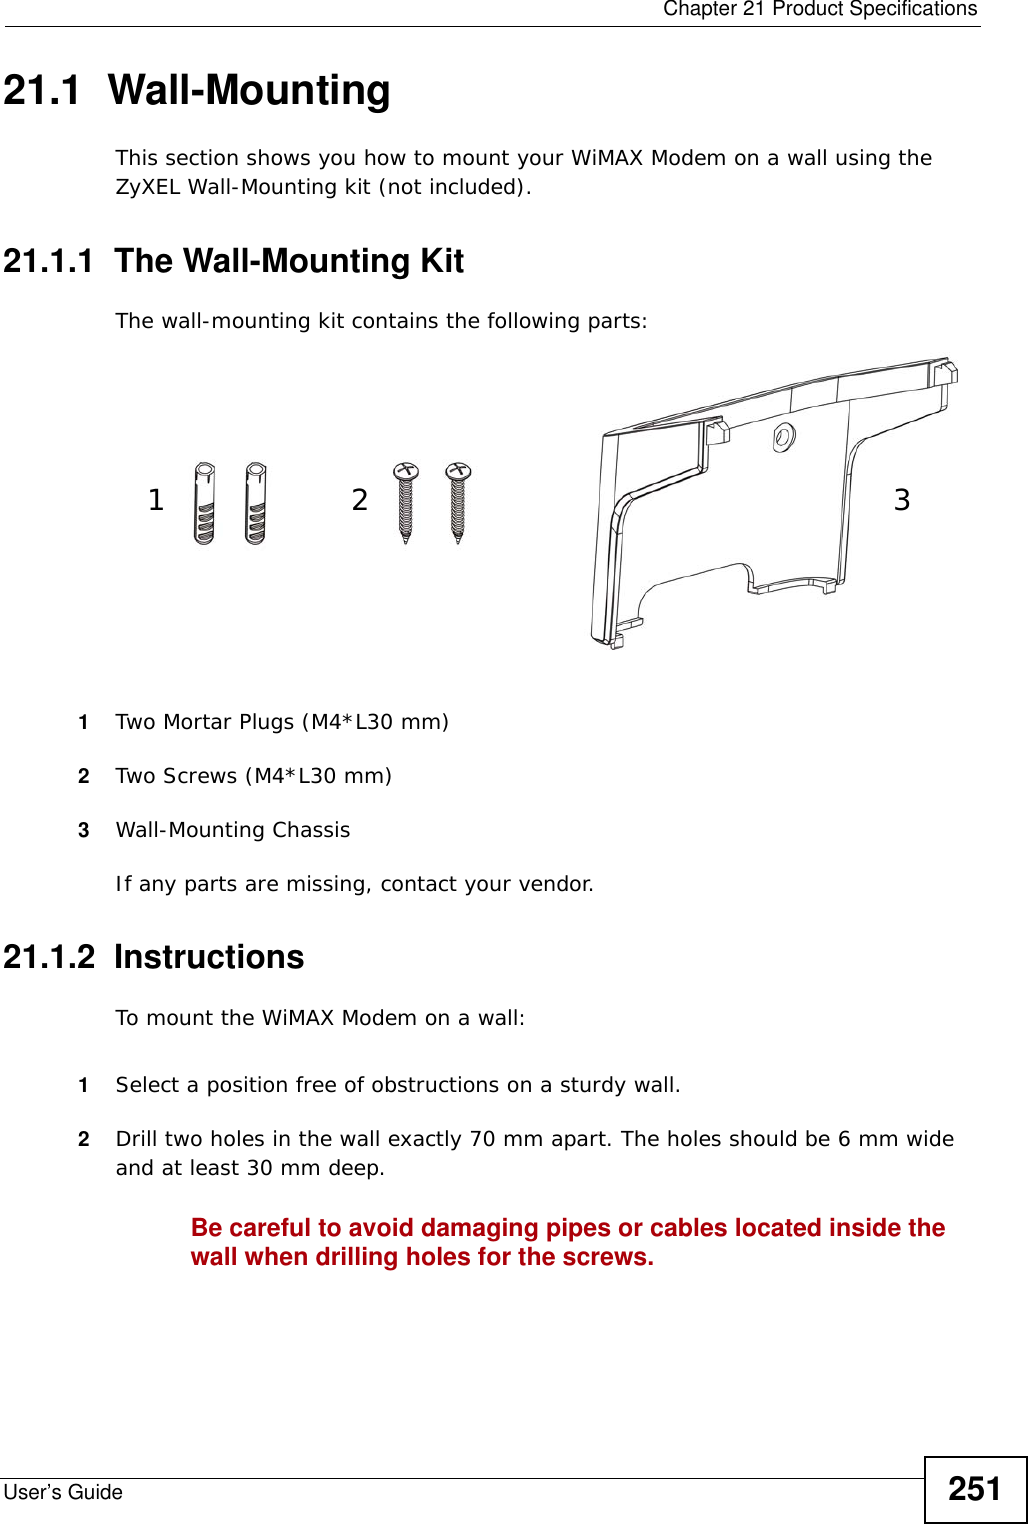  Chapter 21 Product SpecificationsUser’s Guide 25121.1  Wall-MountingThis section shows you how to mount your WiMAX Modem on a wall using the ZyXEL Wall-Mounting kit (not included).21.1.1  The Wall-Mounting KitThe wall-mounting kit contains the following parts:1Two Mortar Plugs (M4*L30 mm)2Two Screws (M4*L30 mm)3Wall-Mounting ChassisIf any parts are missing, contact your vendor.21.1.2  InstructionsTo mount the WiMAX Modem on a wall:1Select a position free of obstructions on a sturdy wall. 2Drill two holes in the wall exactly 70 mm apart. The holes should be 6 mm wide and at least 30 mm deep.Be careful to avoid damaging pipes or cables located inside the wall when drilling holes for the screws.12 3